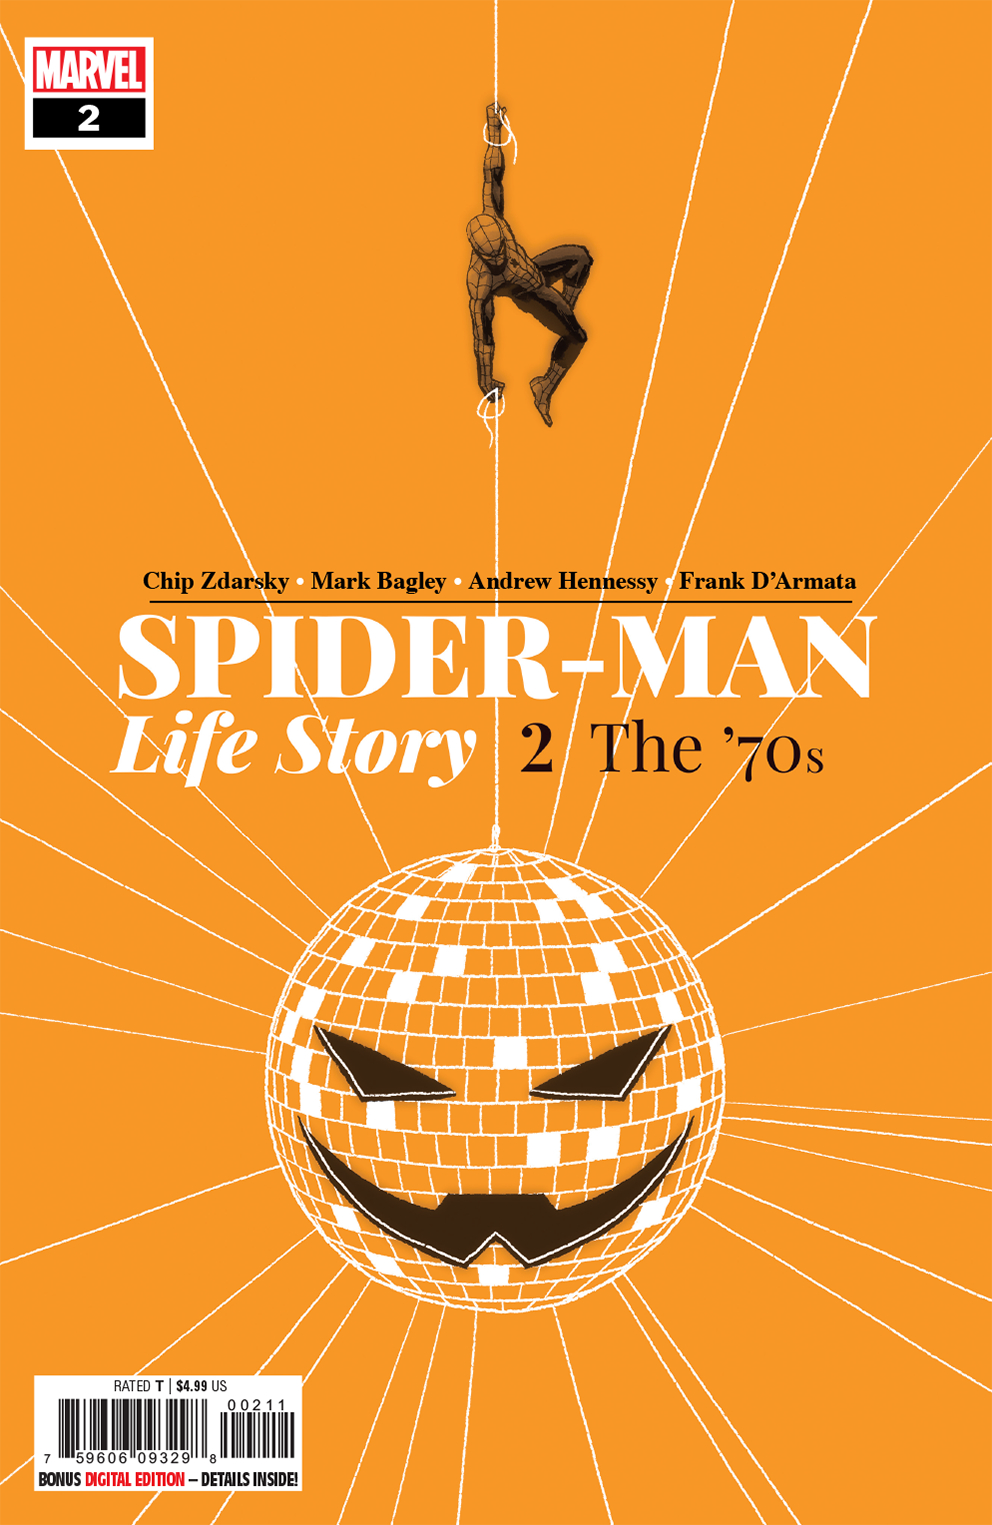 SPIDER-MAN LIFE STORY #2 (OF 6)